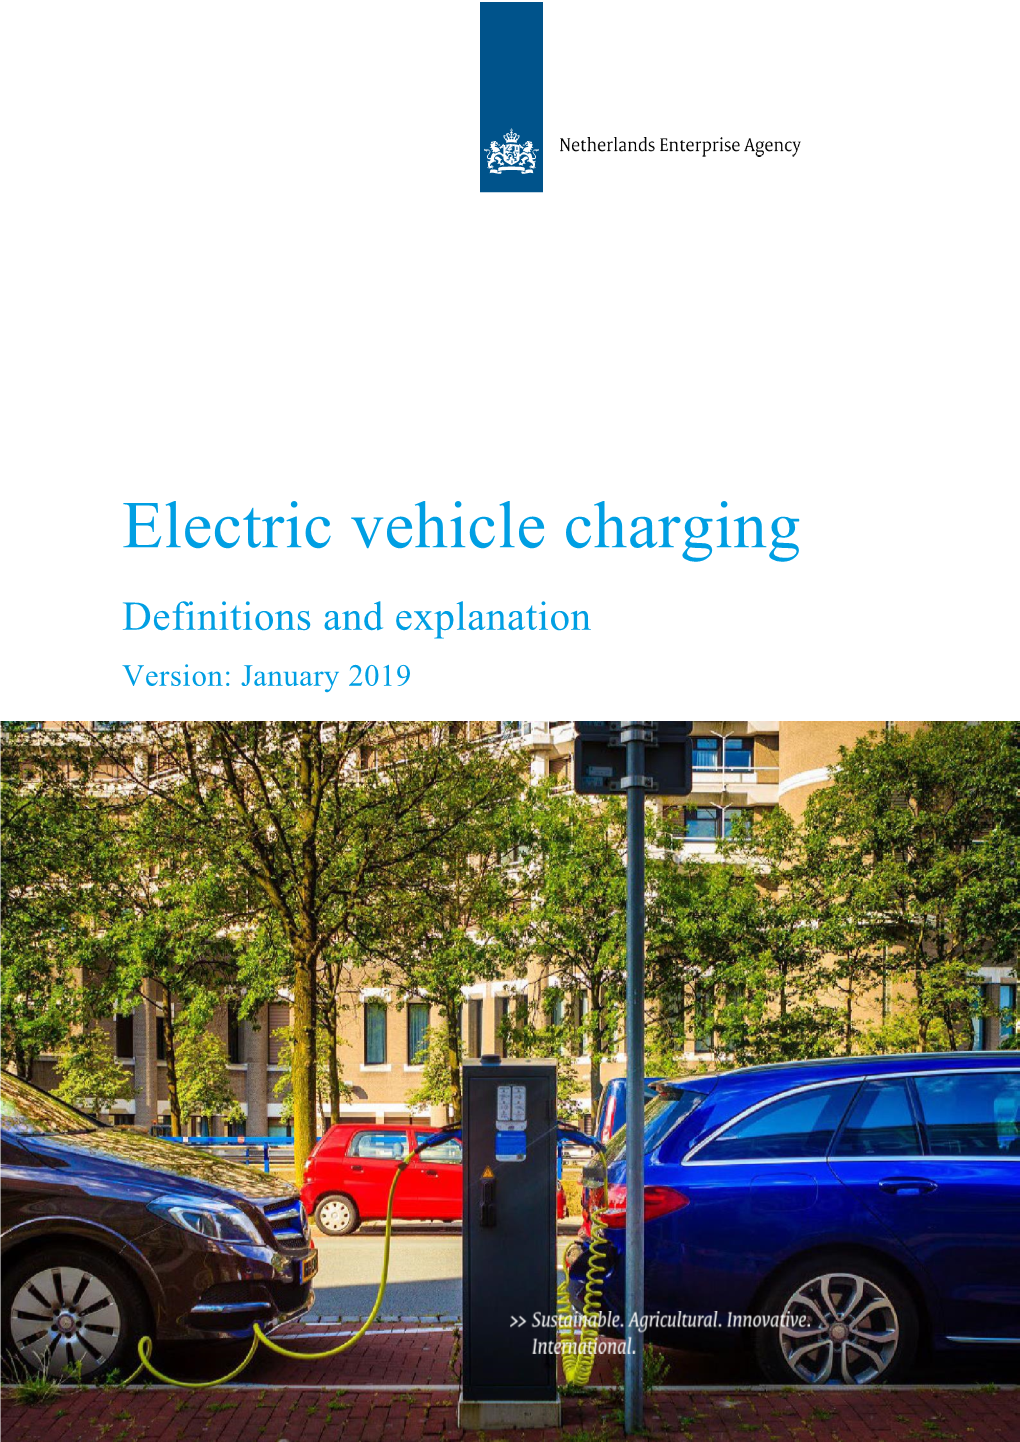 Electric Vehicle Charging Definitions and Explanation Version: January 2019